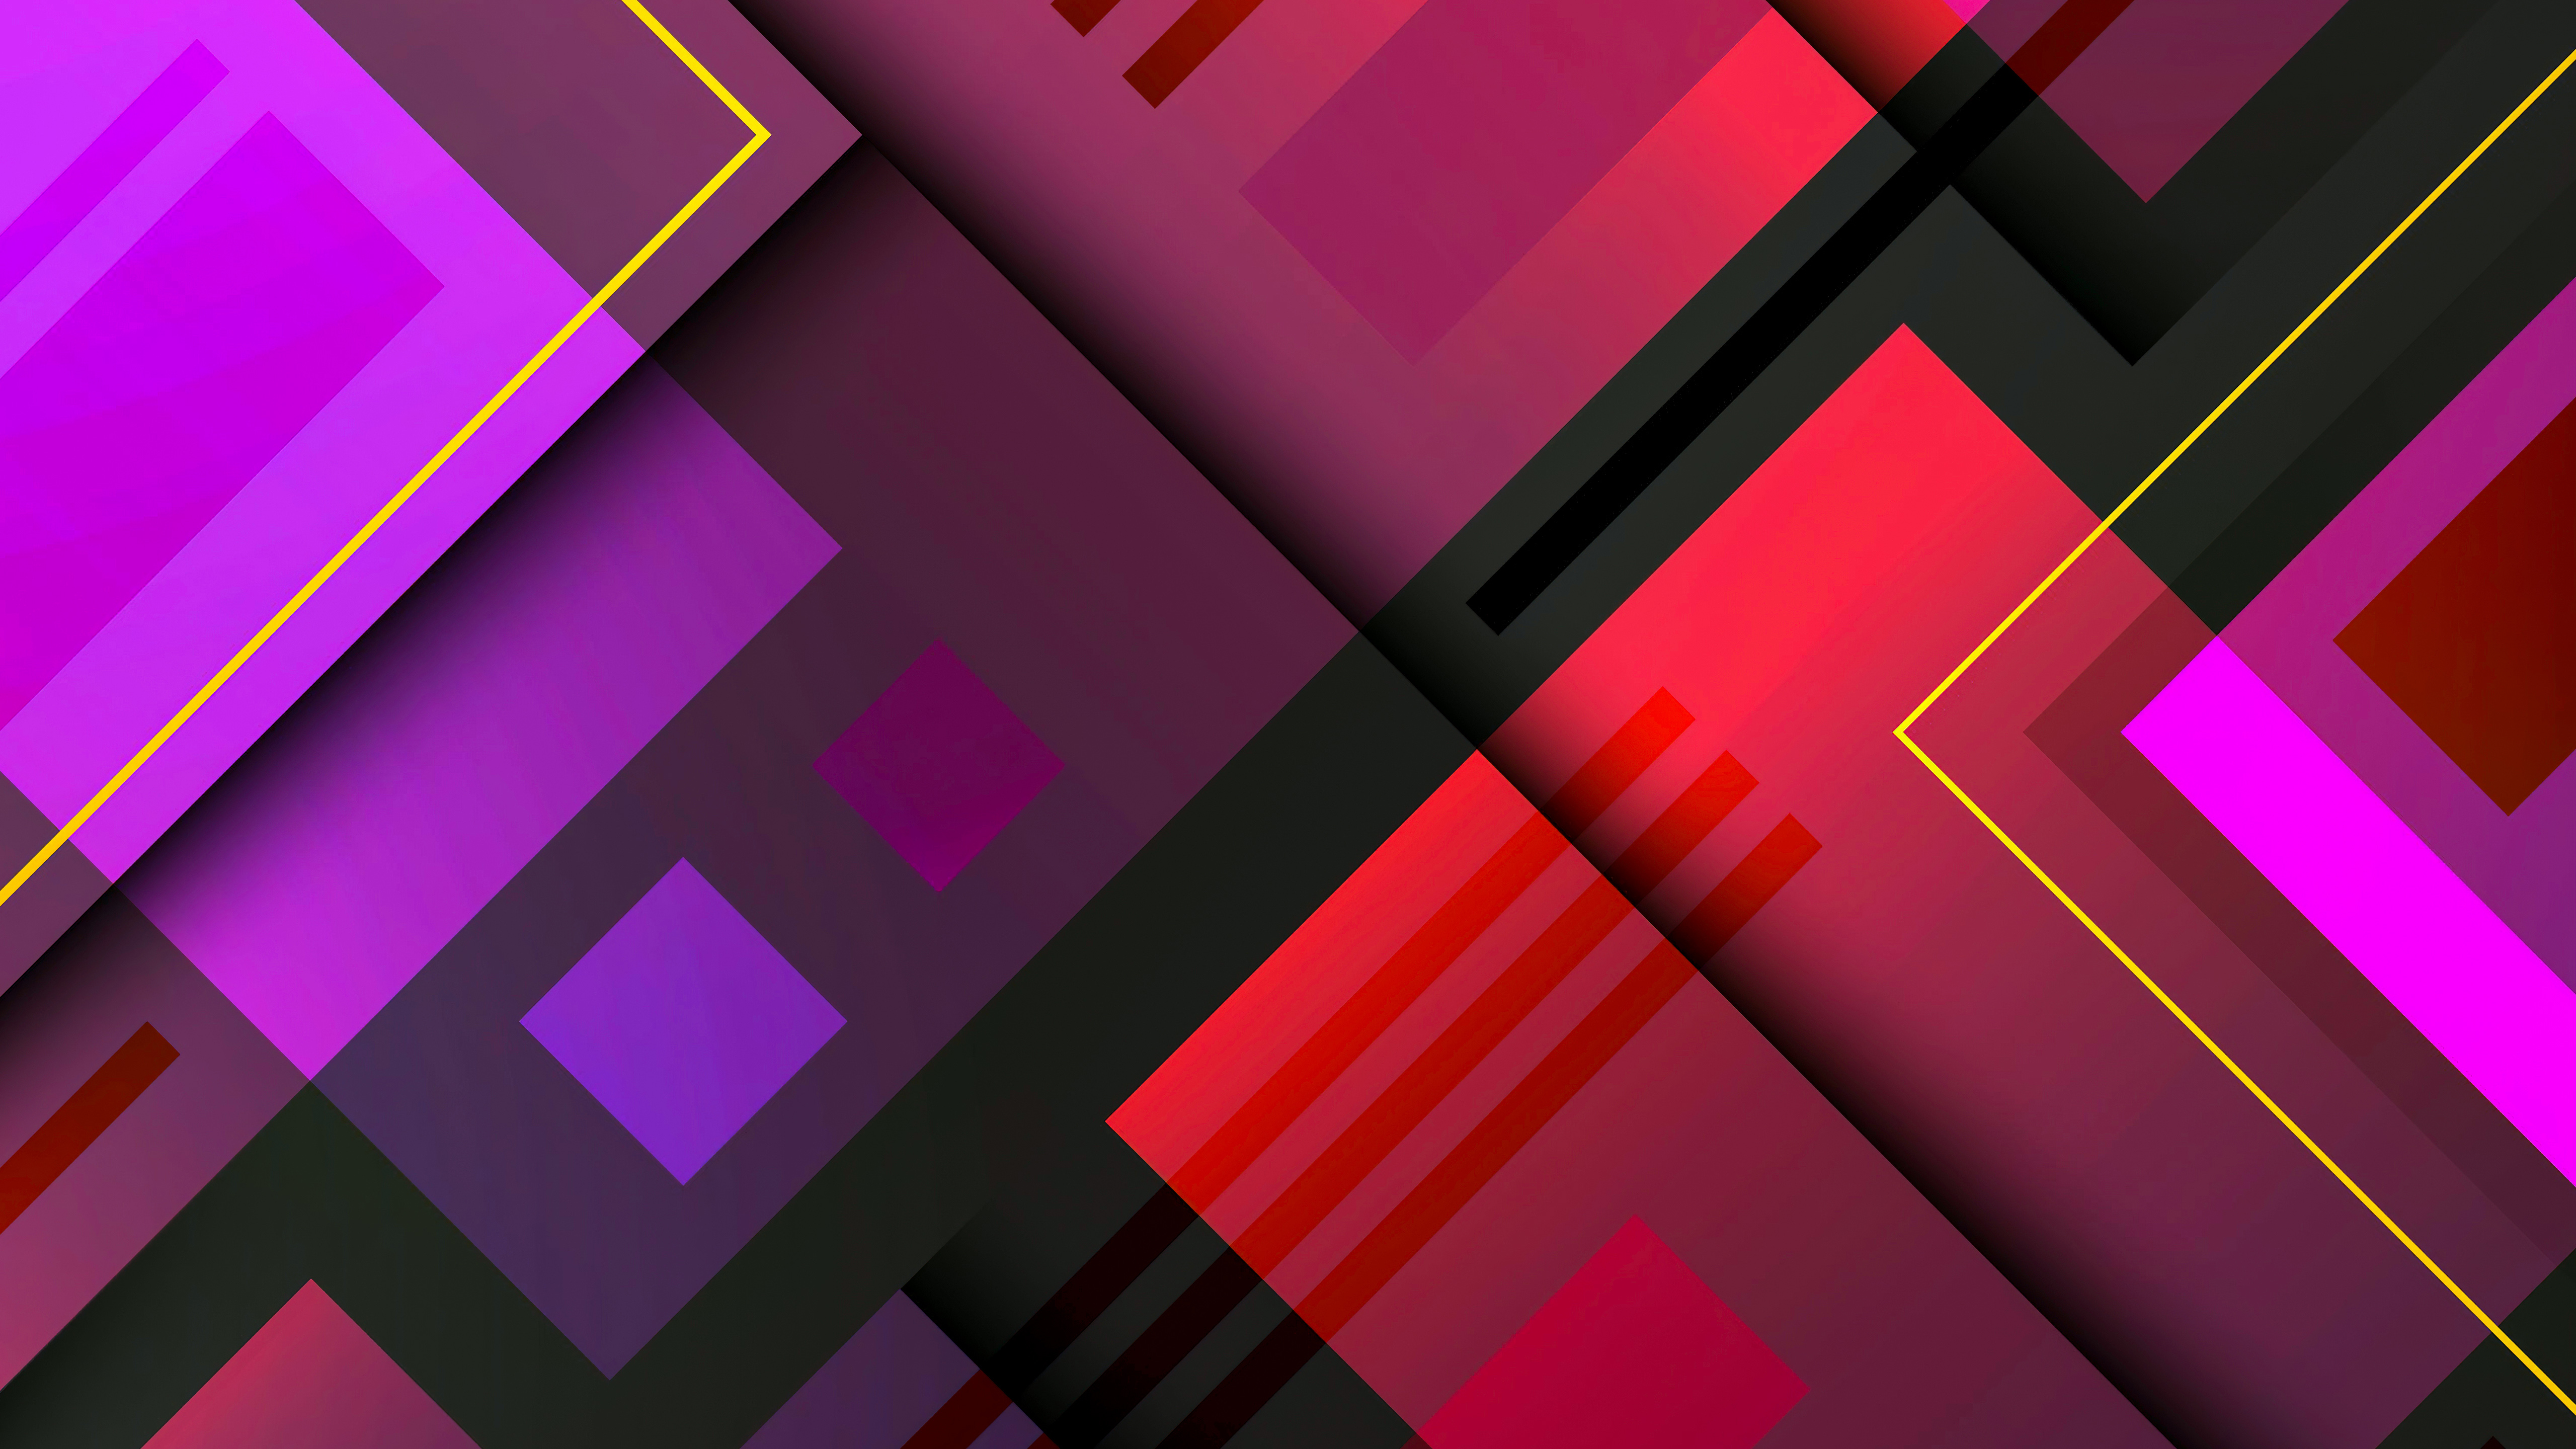 Colorful Geometric Shapes Pattern 4K HD Abstract Wallpaper